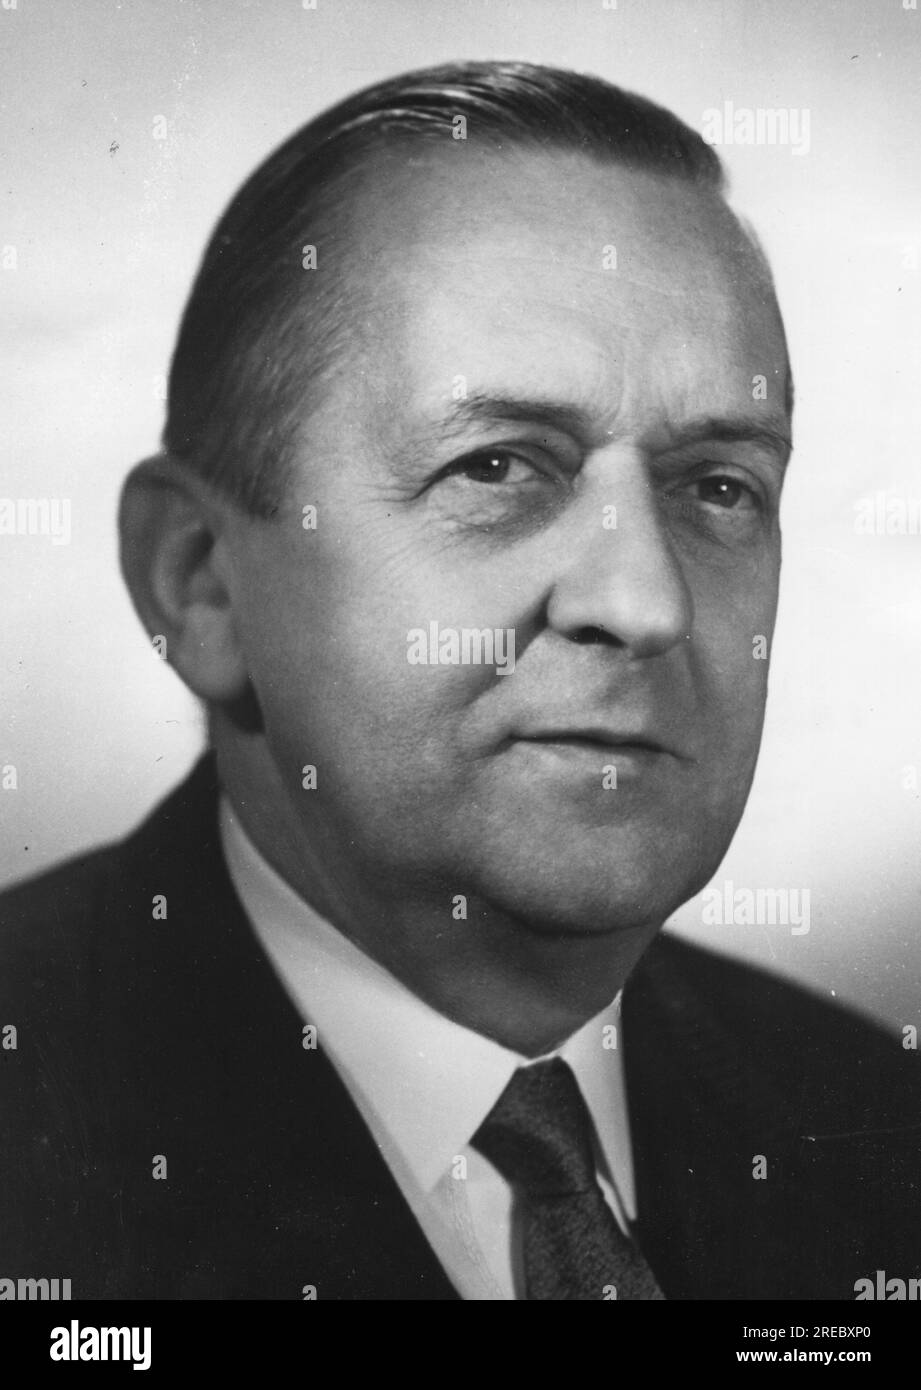 Weiss, Ludwig, 25.8.1902 - 30.9.1994, Austrian politician (Austrian People's Party), ADDITIONAL-RIGHTS-CLEARANCE-INFO-NOT-AVAILABLE Stock Photo